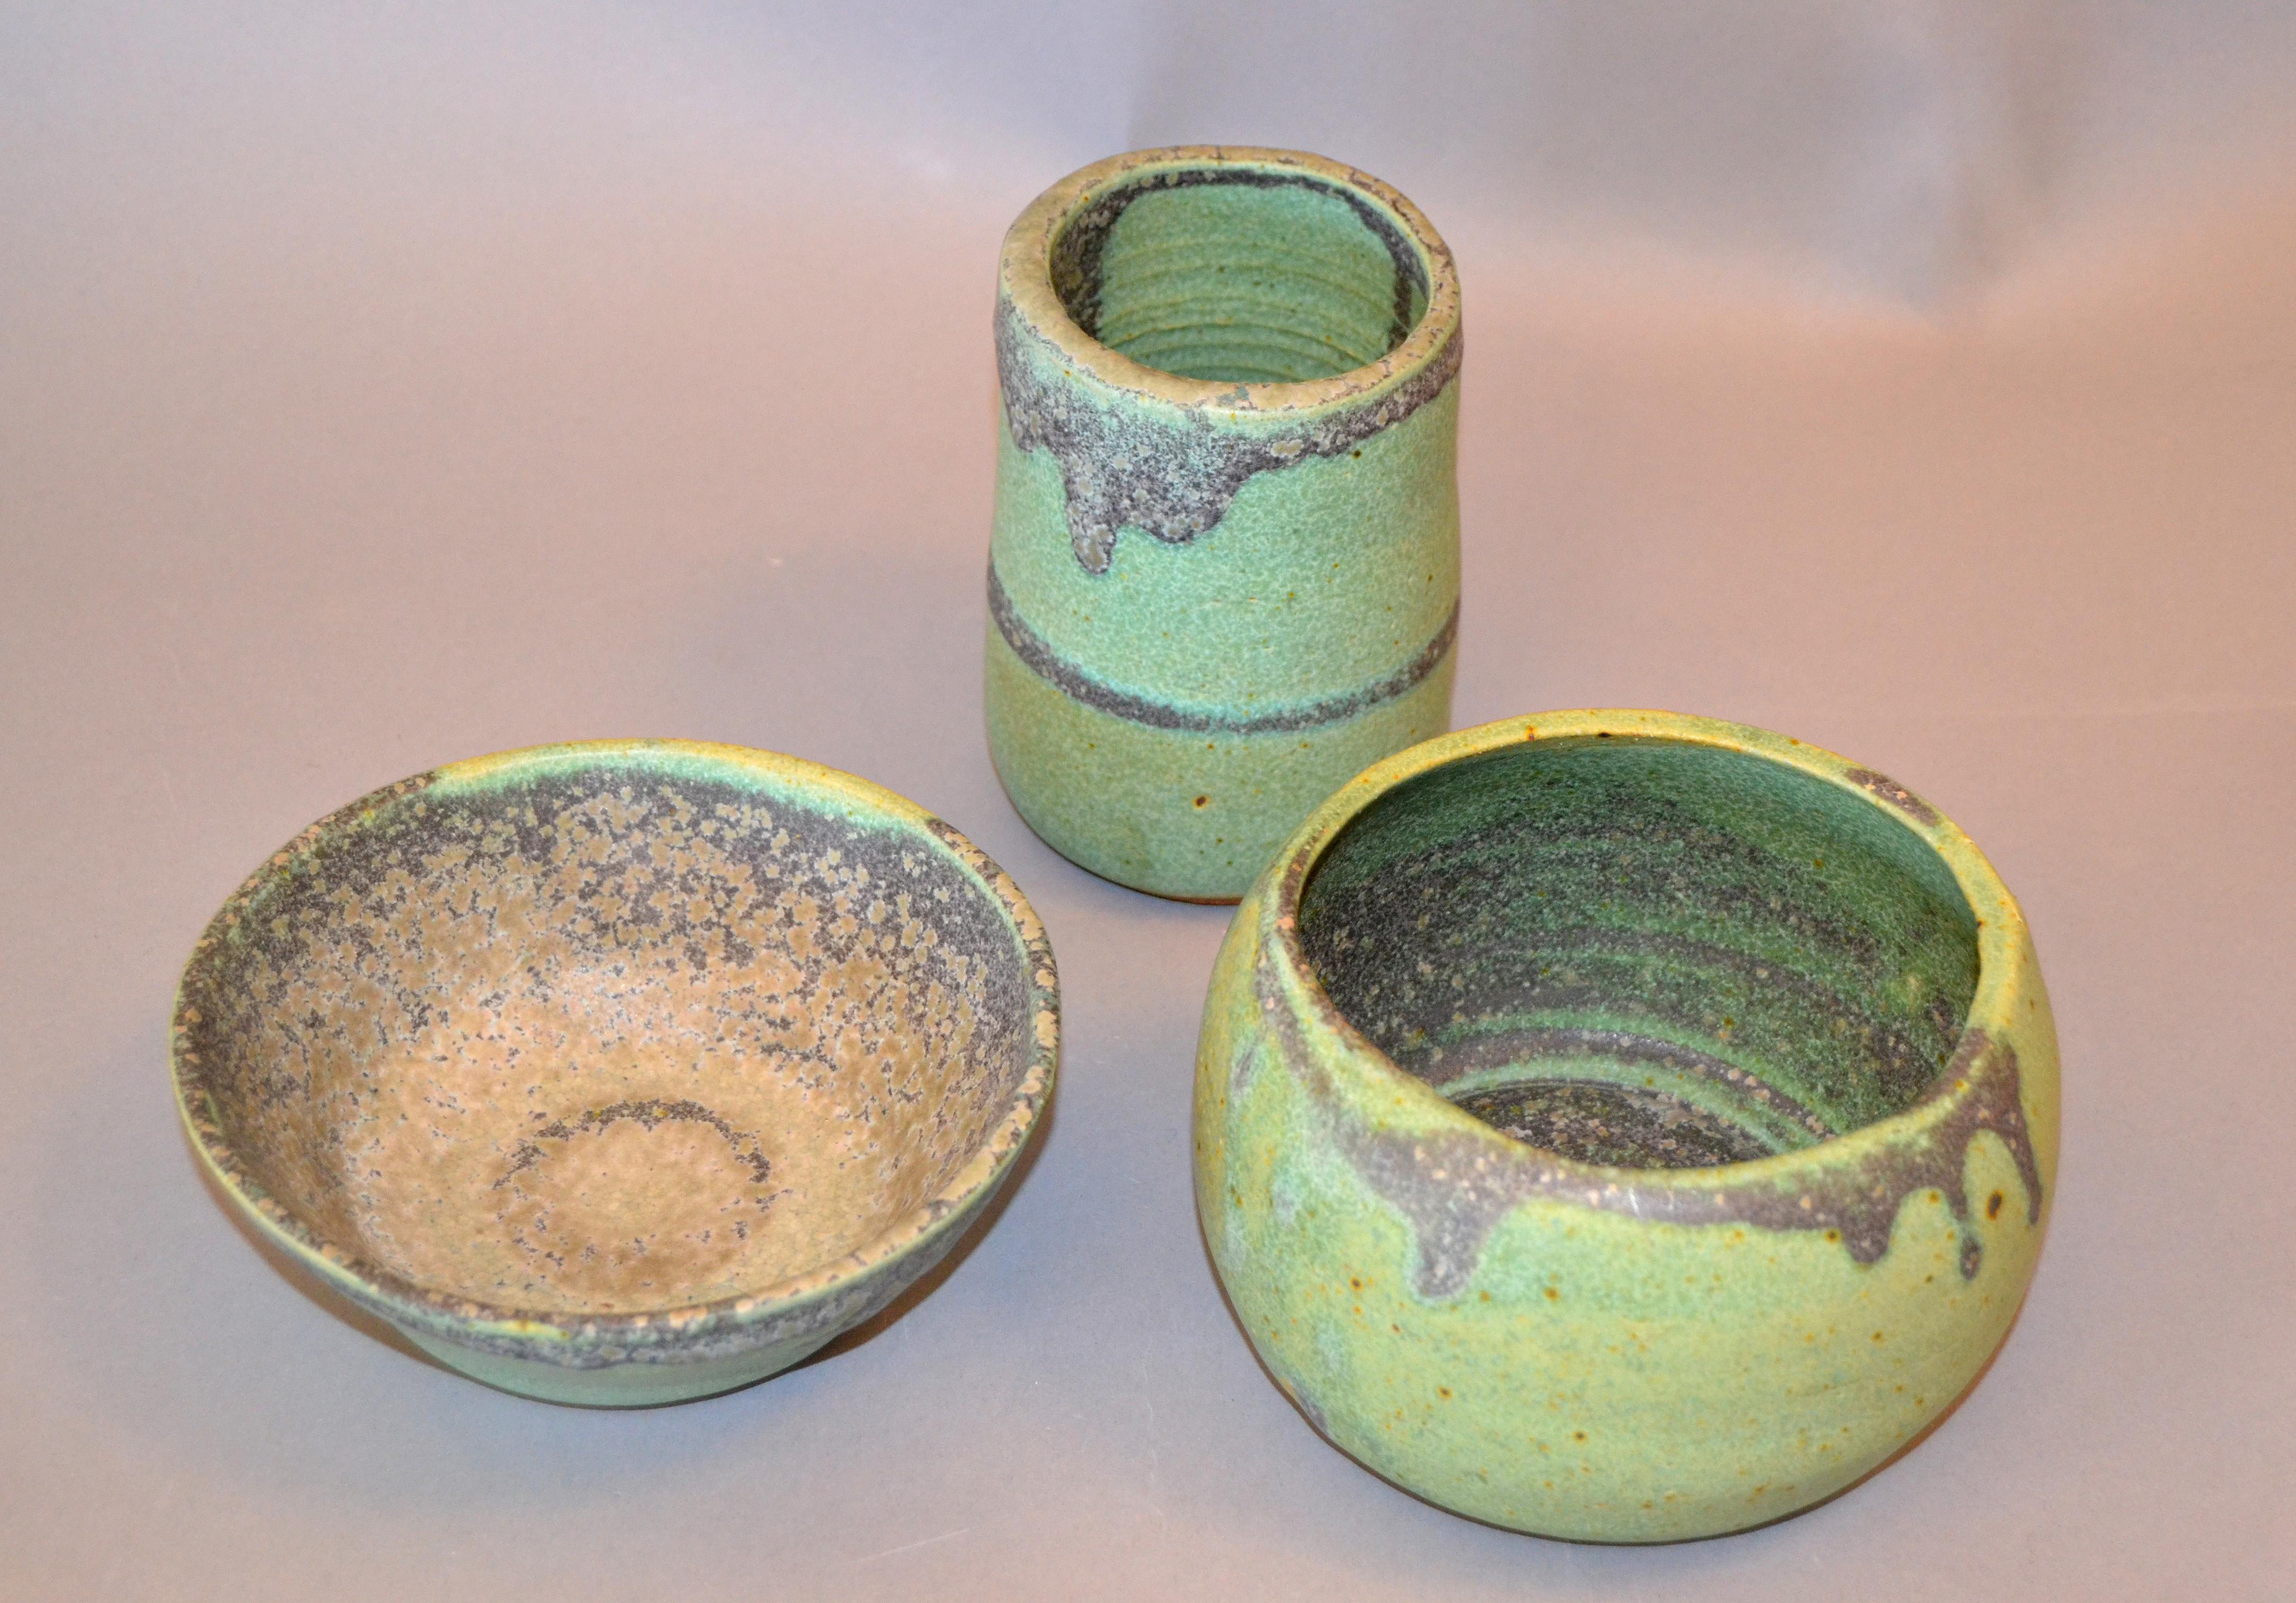 Set of 3 vintage handcrafted Aztec green, gray and brown group of pottery bowls, vessel.
Makers mark underneath, NG.
Dimensions:
Flat bowl diameter 6 inches, height 2.25 inches;
Tall small bowl diameter 3.75 inches, height 5 inches;
Bowl